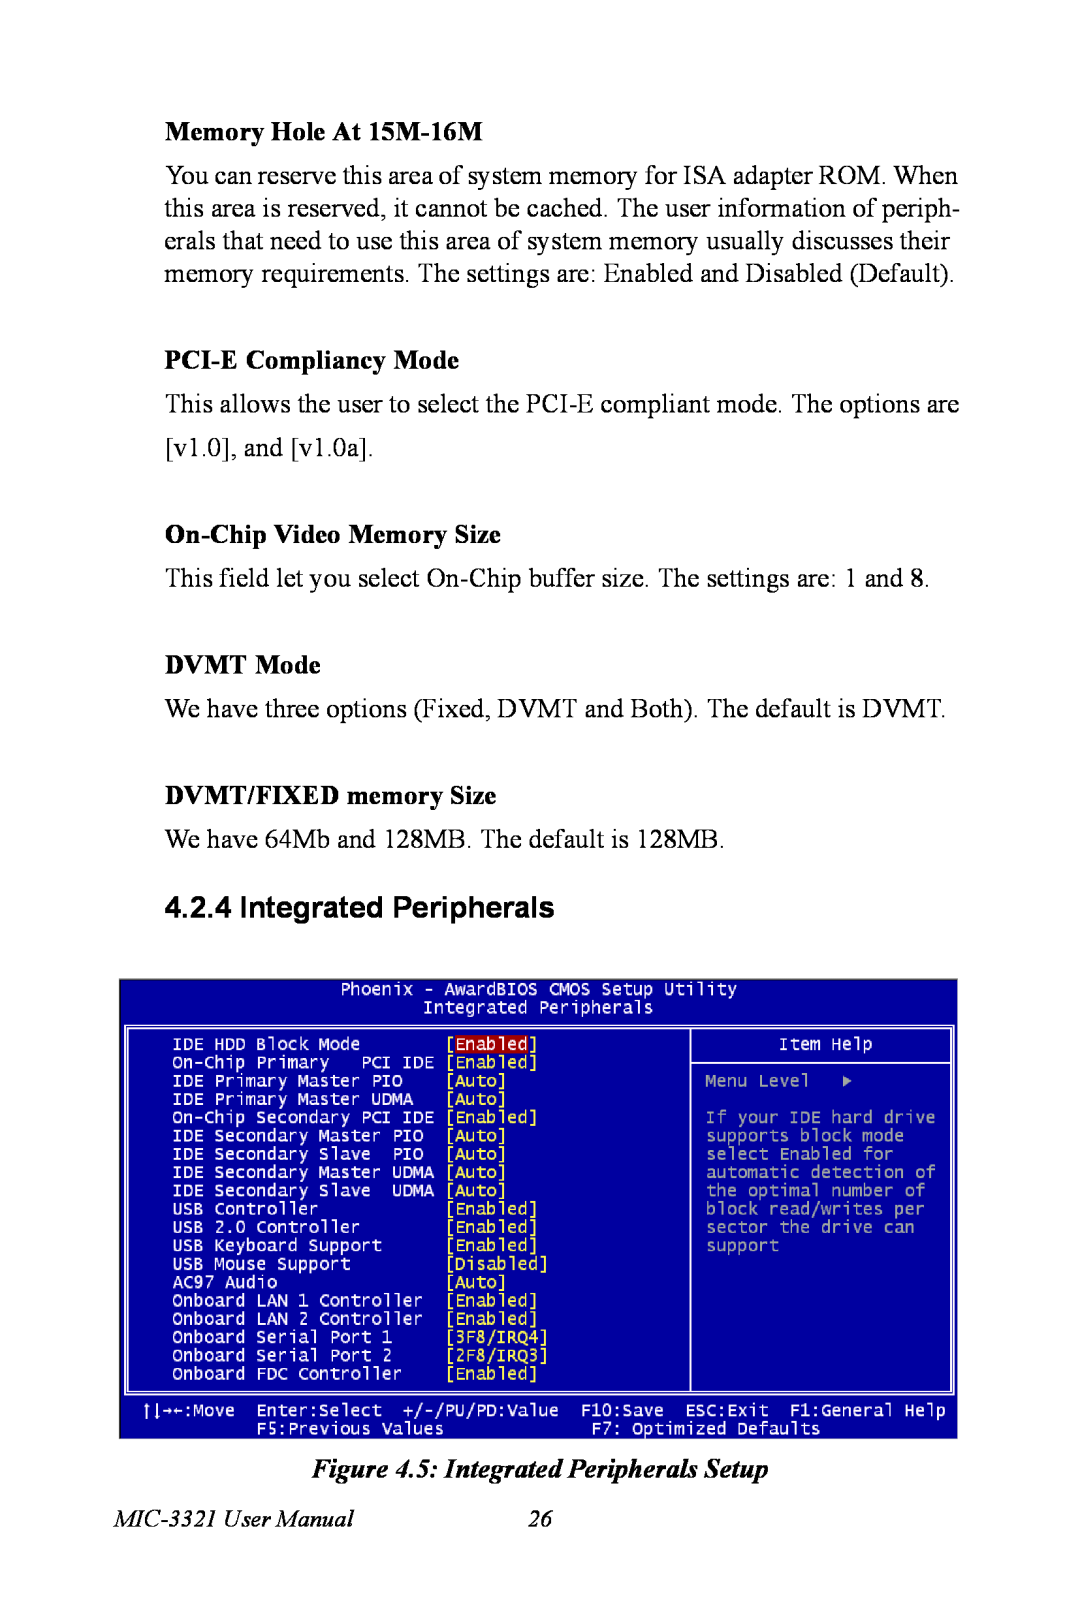 Intel MIC-3321 Integrated Peripherals, Memory Hole At 15M-16M, PCI-ECompliancy Mode, On-ChipVideo Memory Size, DVMT Mode 